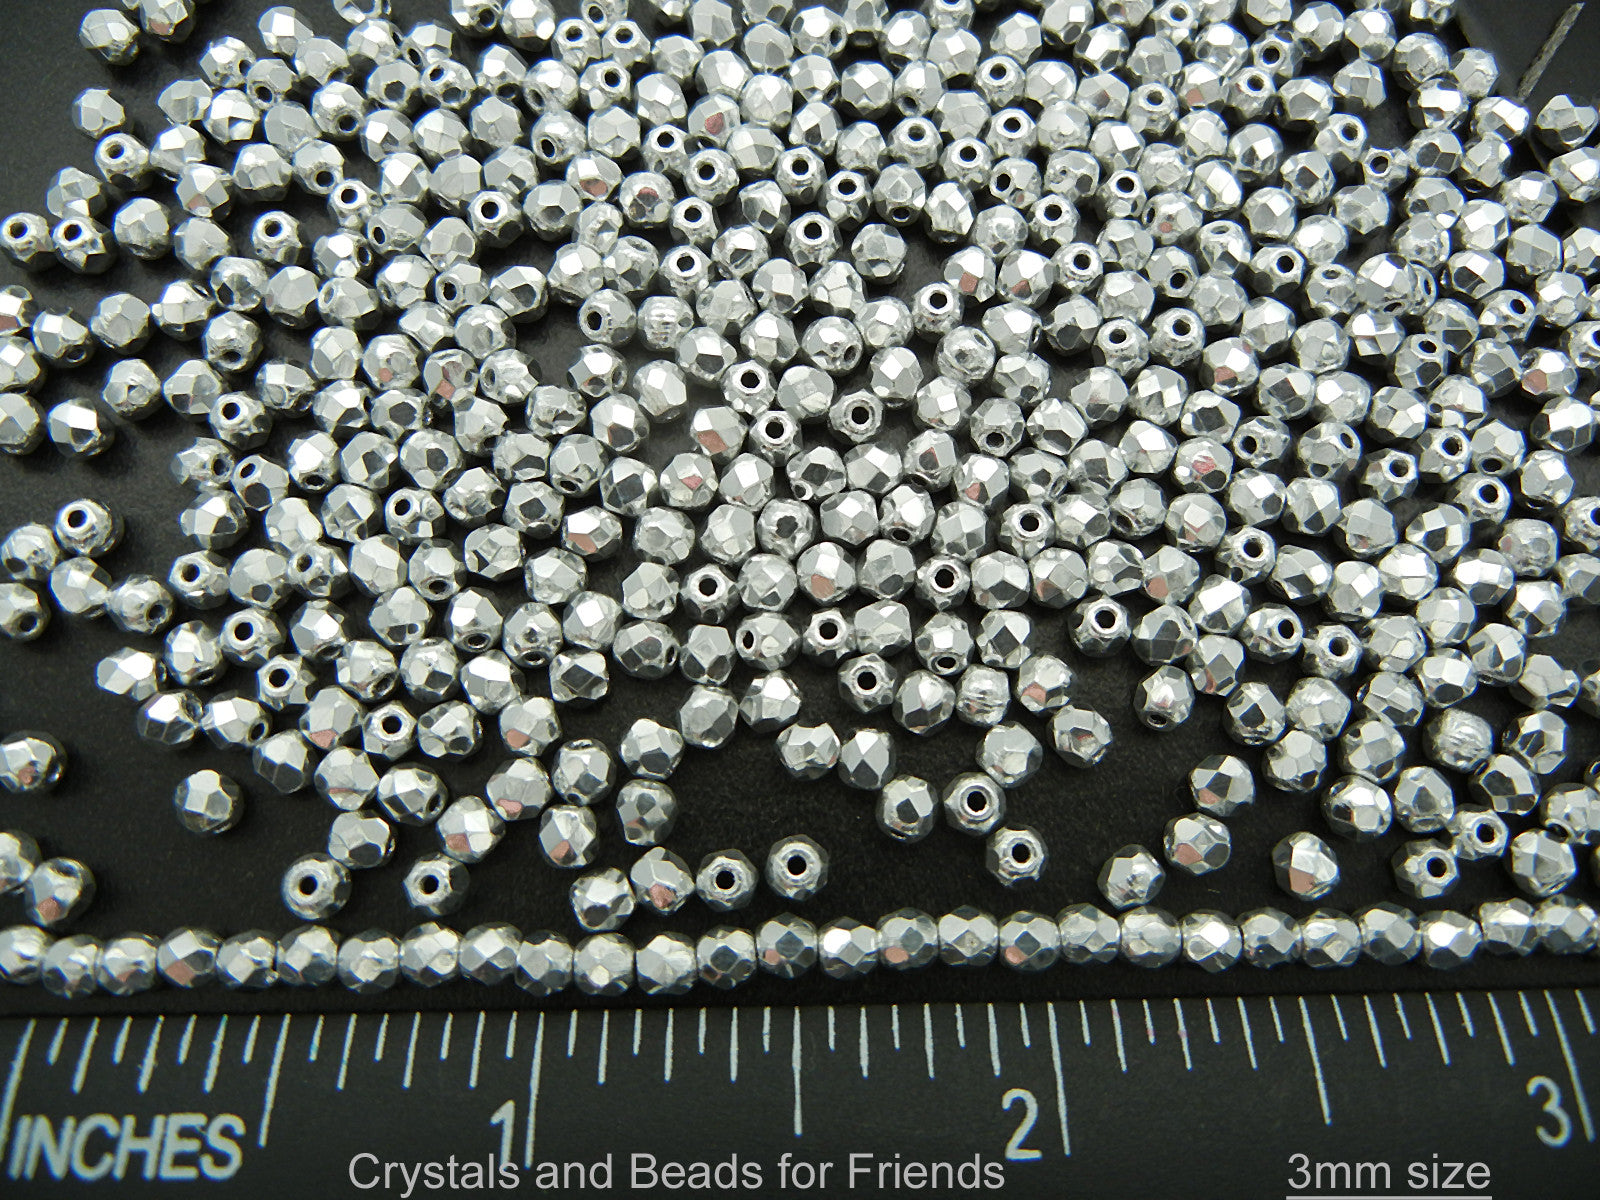 Crystal Labrador CAL2X fully coated, loose Czech Fire Polished Round Faceted Glass Beads, Silver 3mm, 4mm, 6mm, 8mm